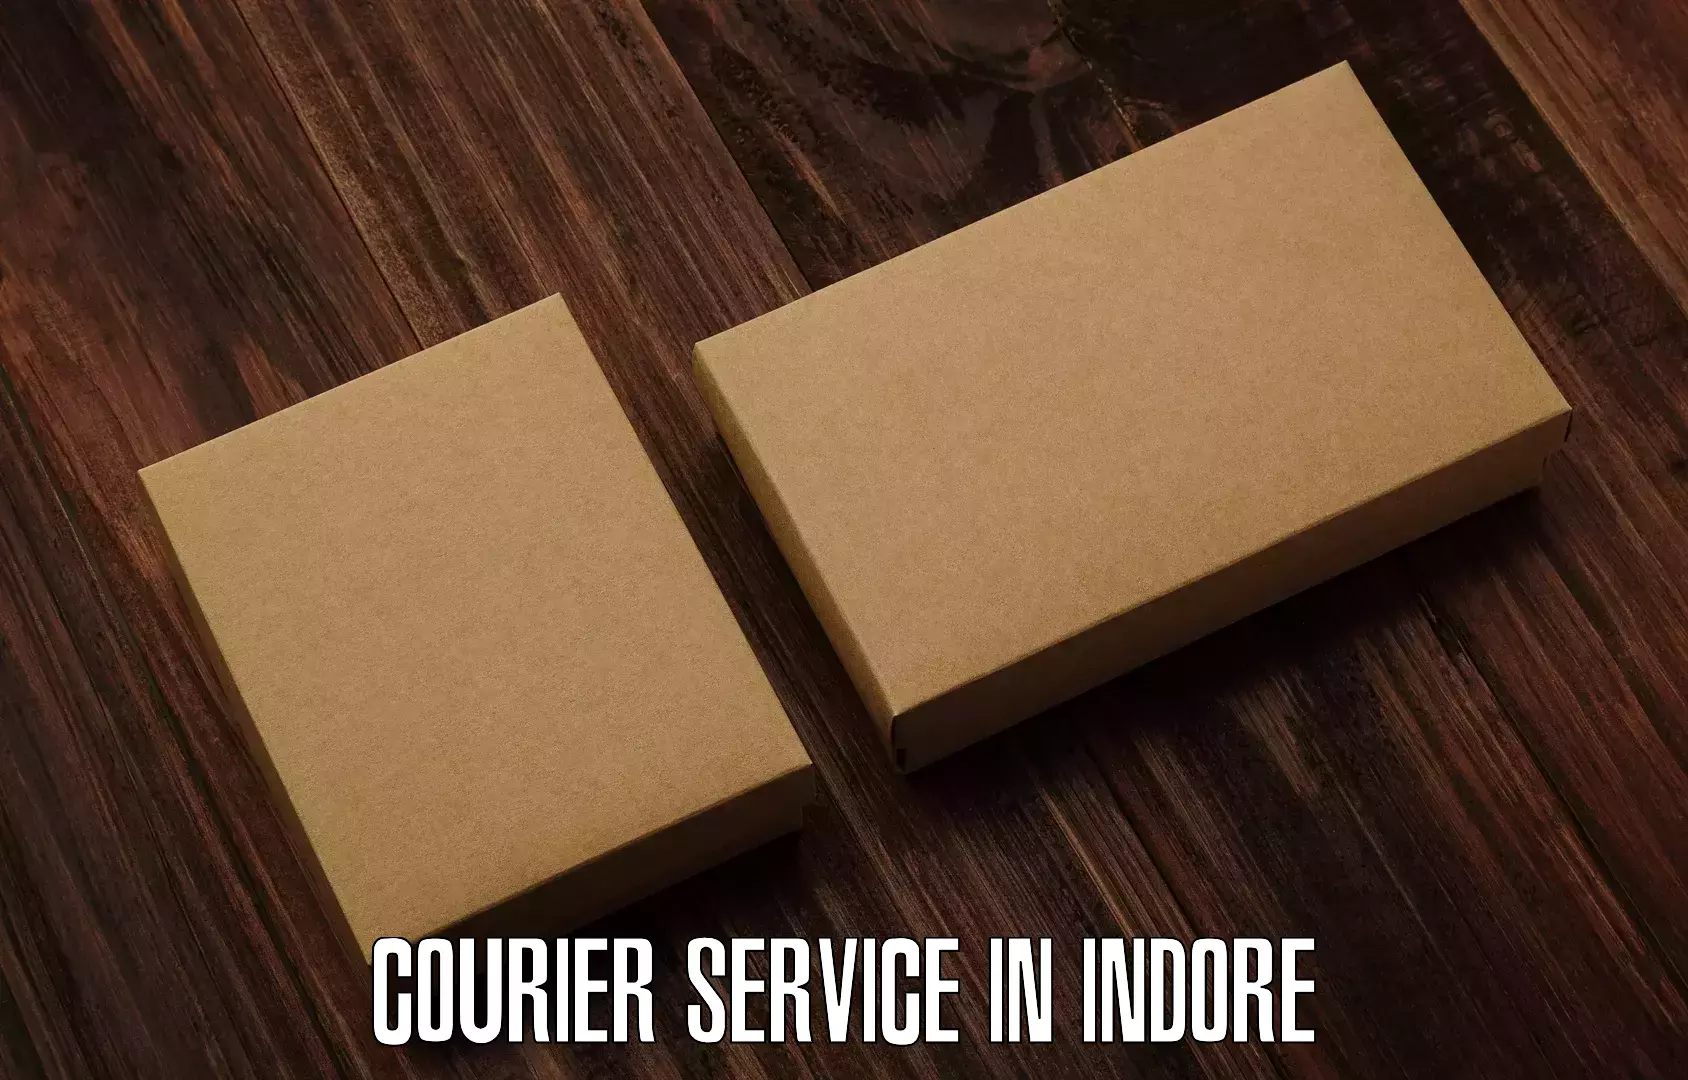 Expedited shipping methods in Indore